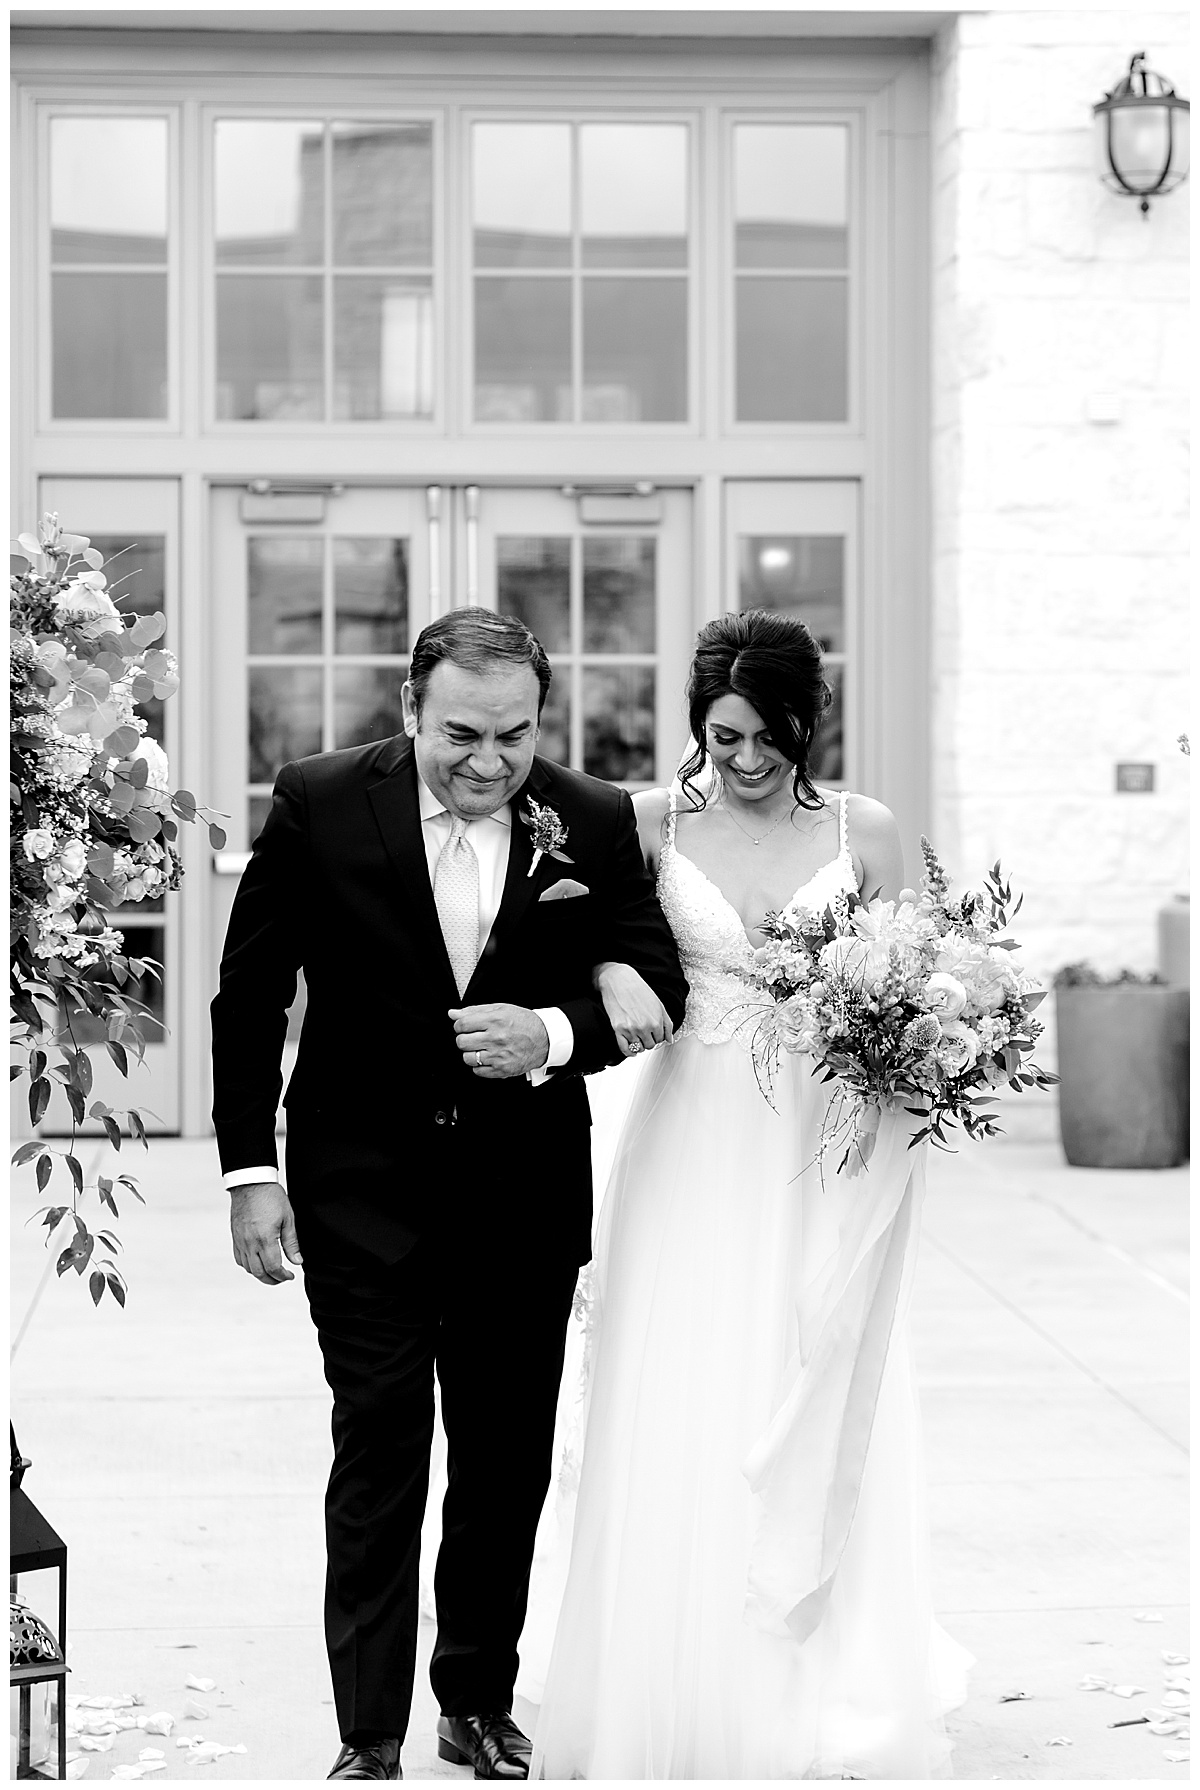 Black and white photo of bride walking down the aisle with father at Hyatt Regency Hill Country Resort Wedding in San Antonio, TX | San Antonio Wedding photographer| Destination Wedding Photographer| Monica Roberts Photography | monicaroberts.com